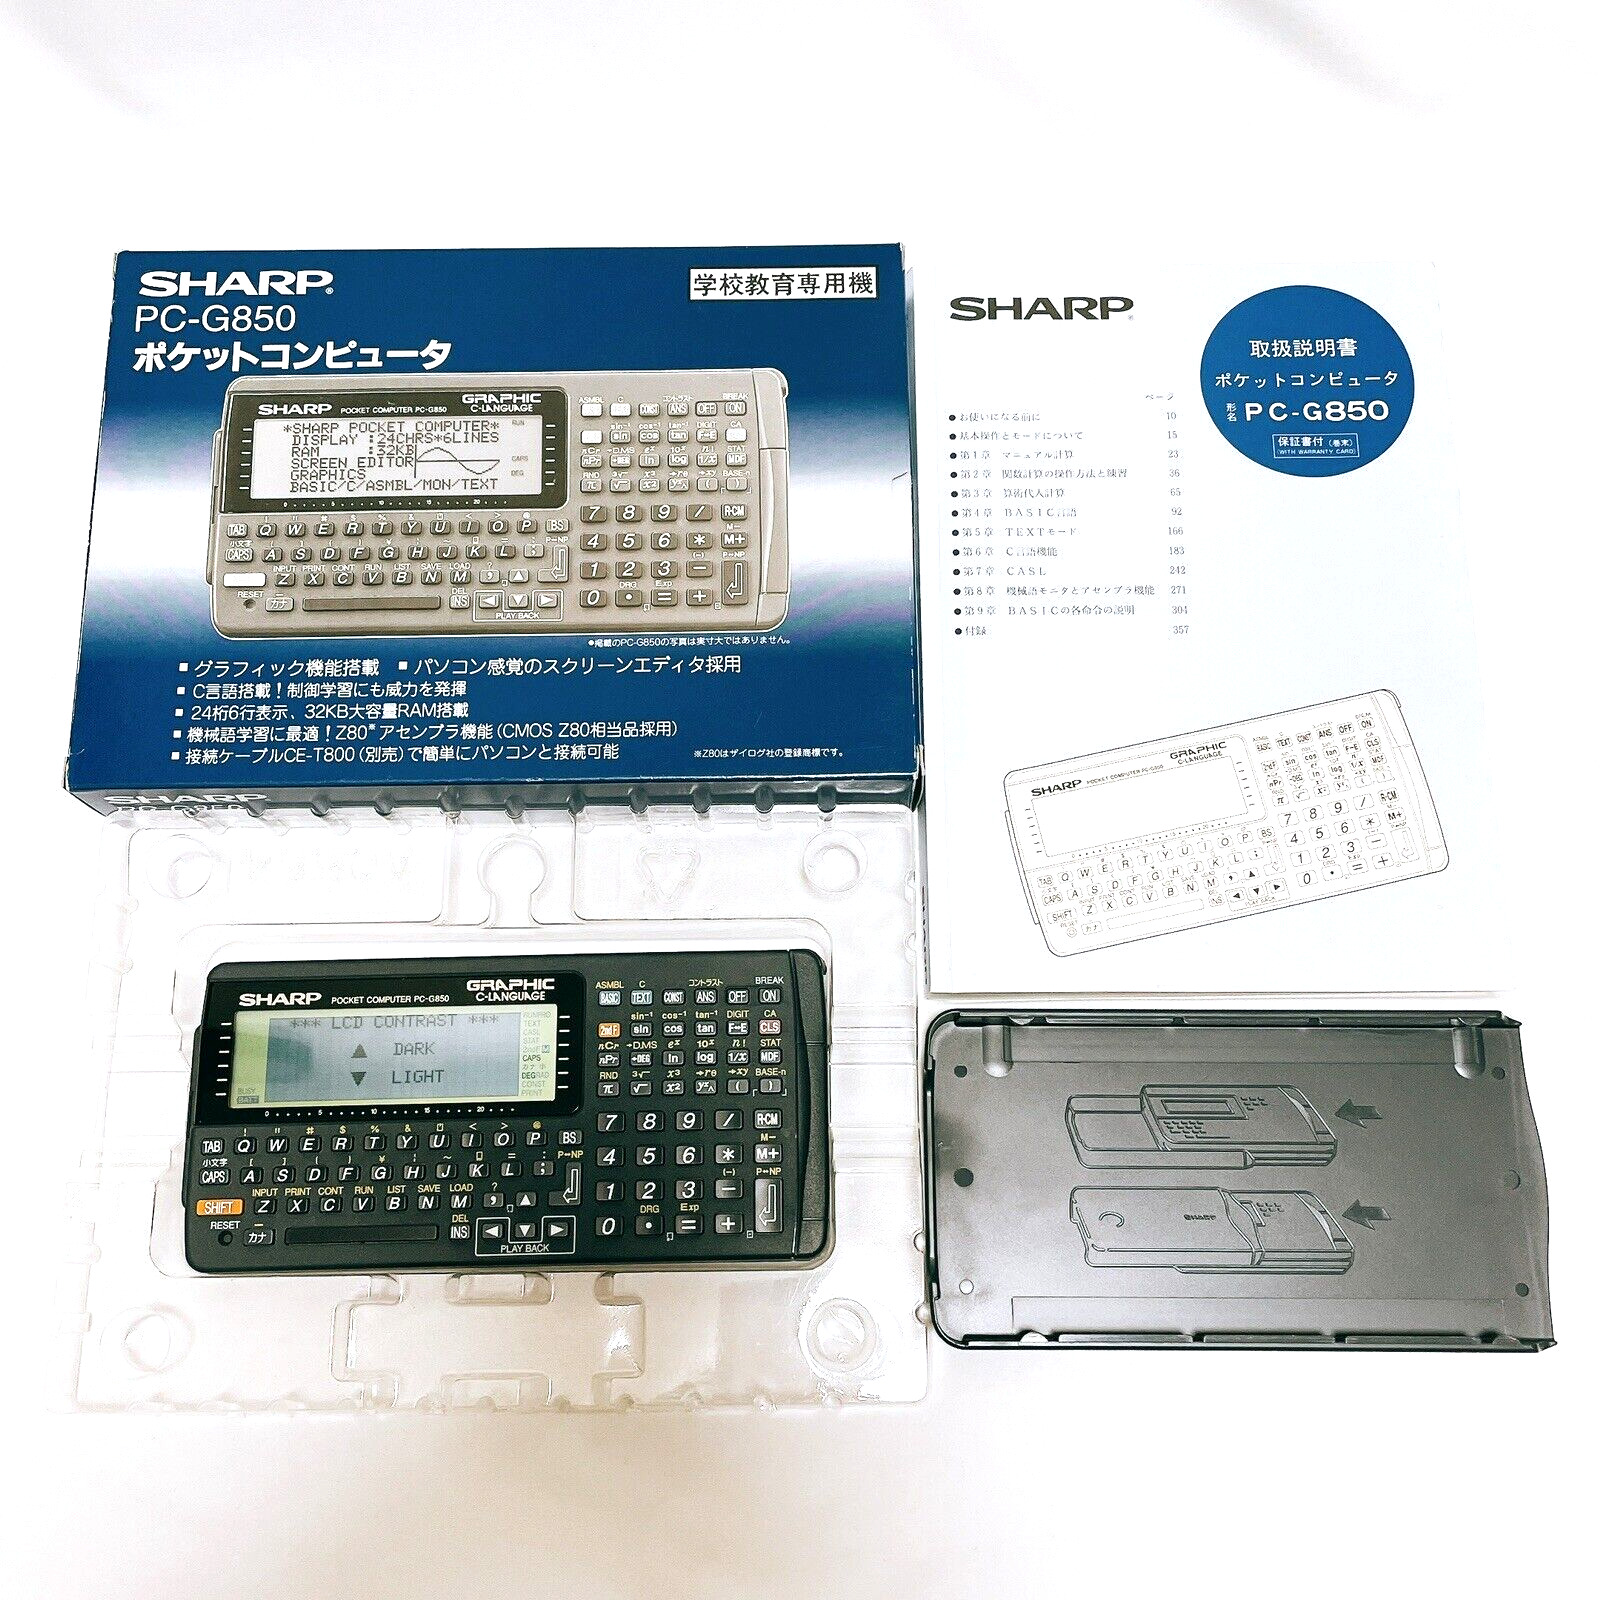 Pocket Computer PC-G850 Sharp w/ Box Manual Working Tested from Japan